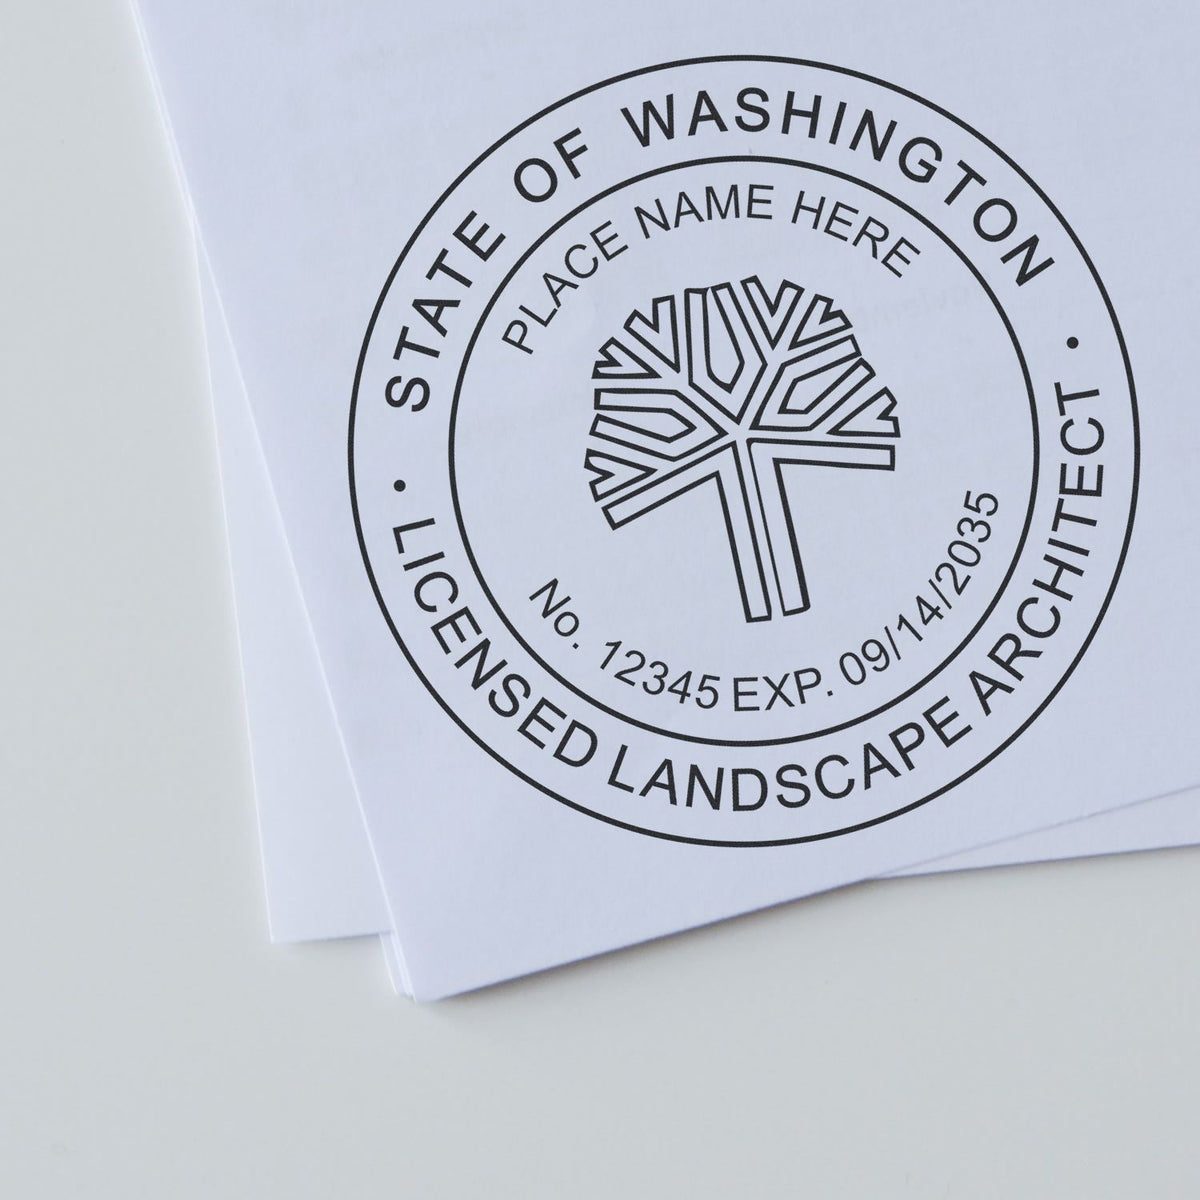 An alternative view of the Slim Pre-Inked Washington Landscape Architect Seal Stamp stamped on a sheet of paper showing the image in use